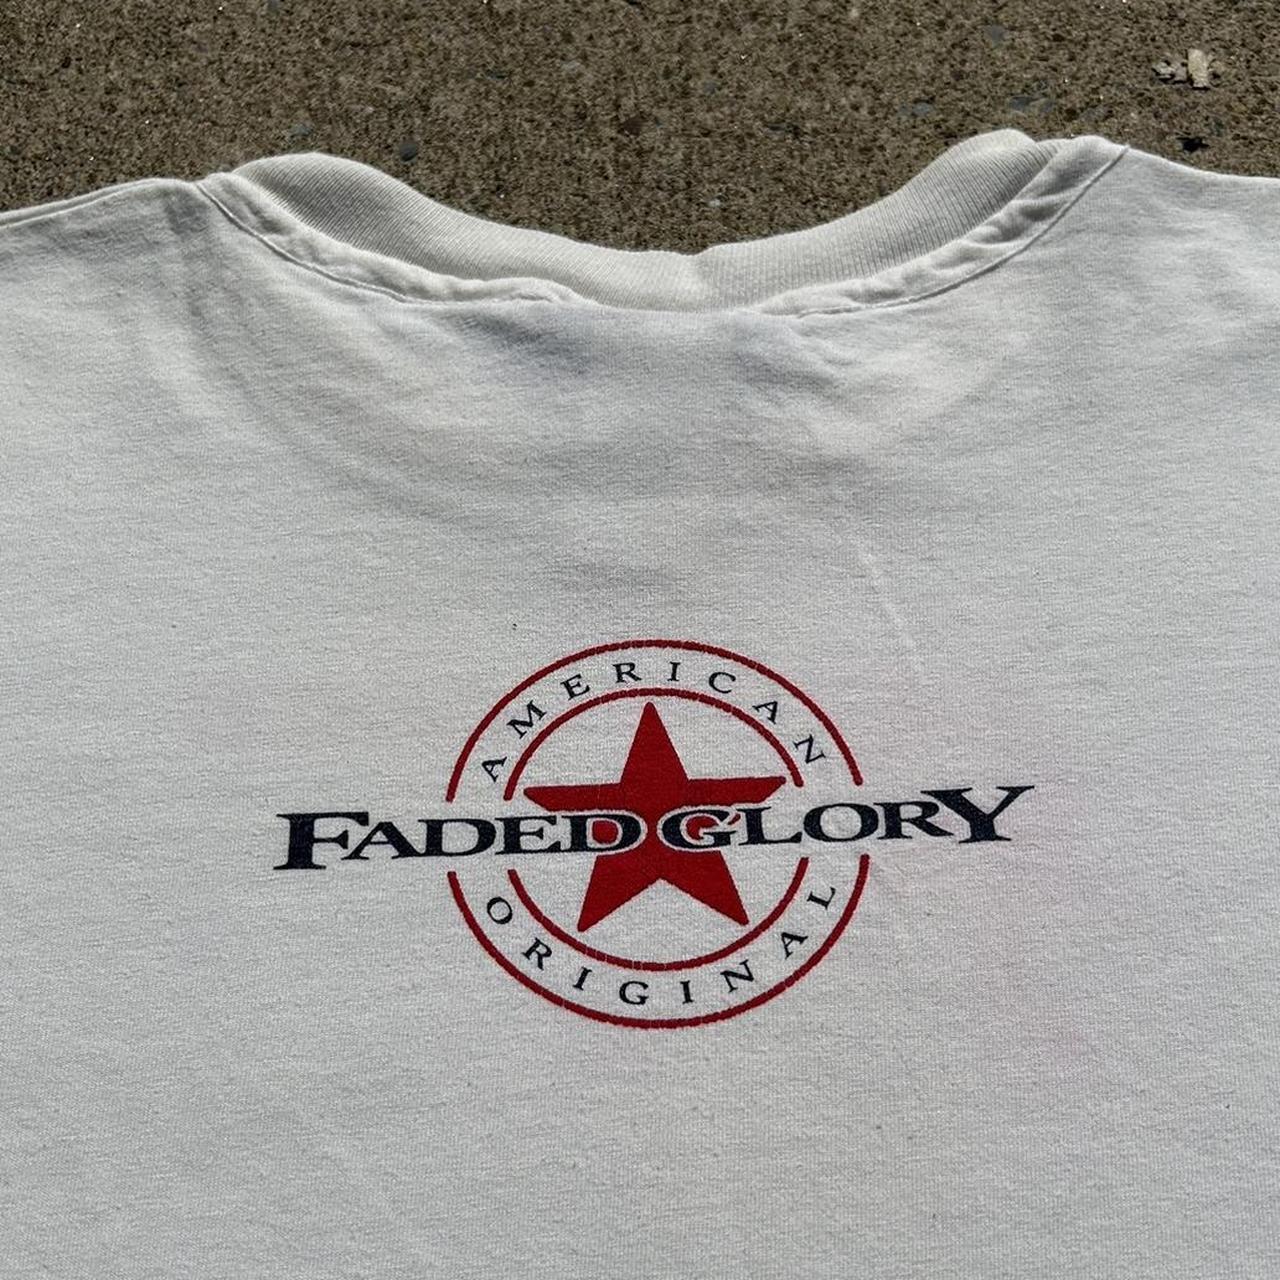 Vintage Faded Glory Tee Made In USA Single Stitch - Depop